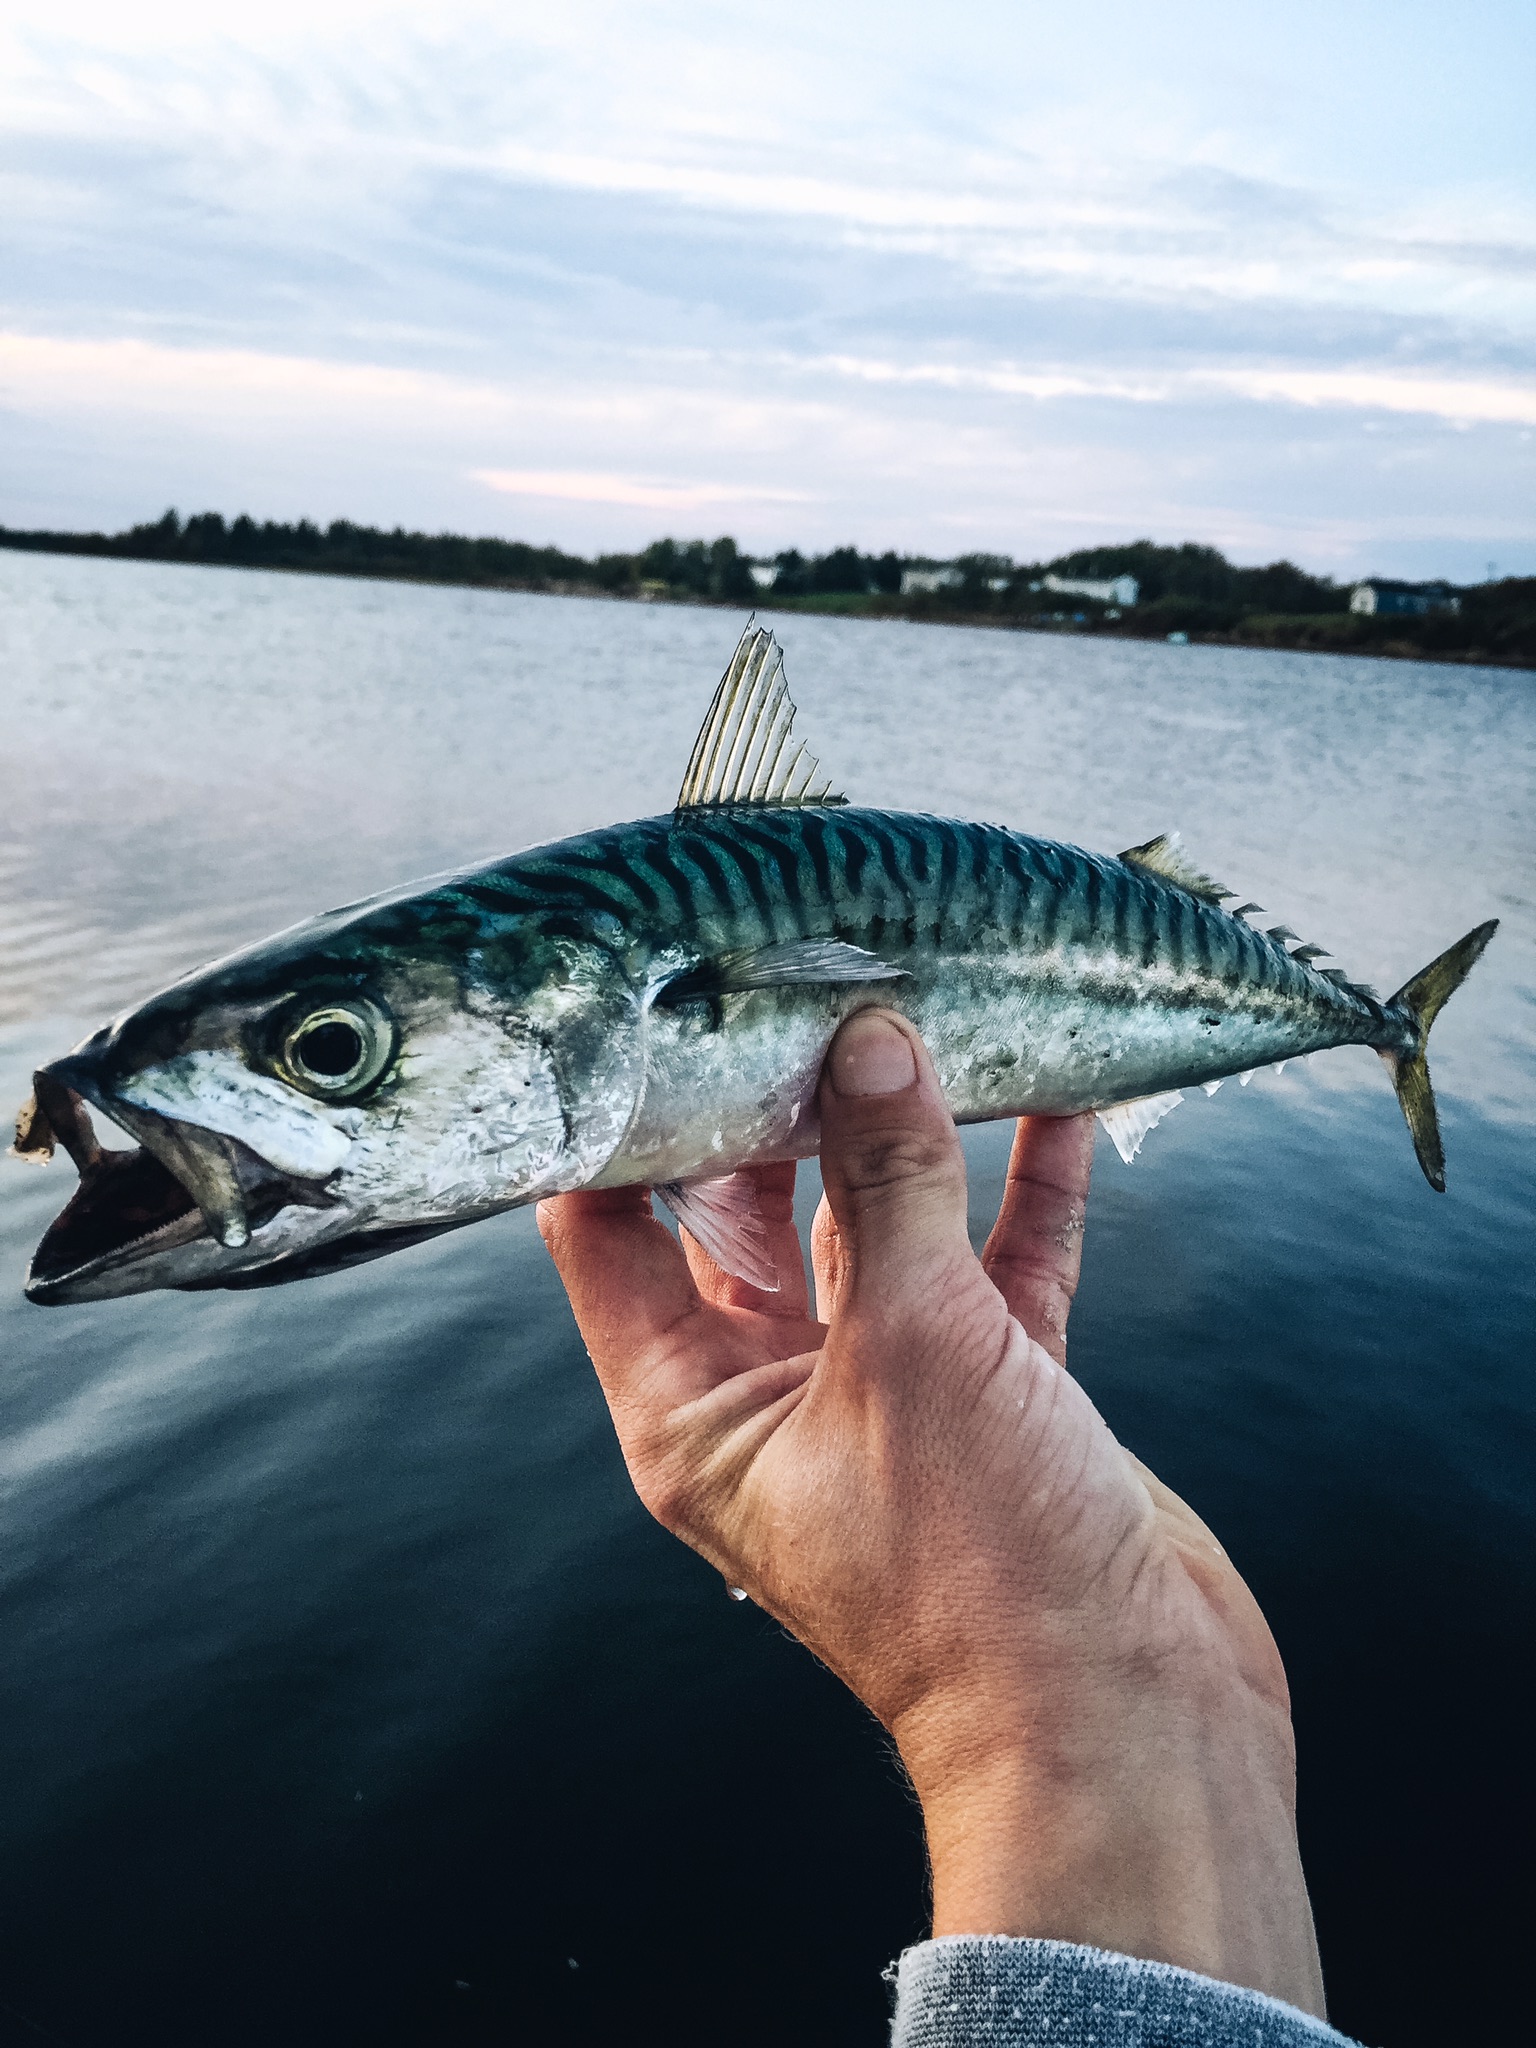  A hand holds a mackerel fish aloft with water in the background.